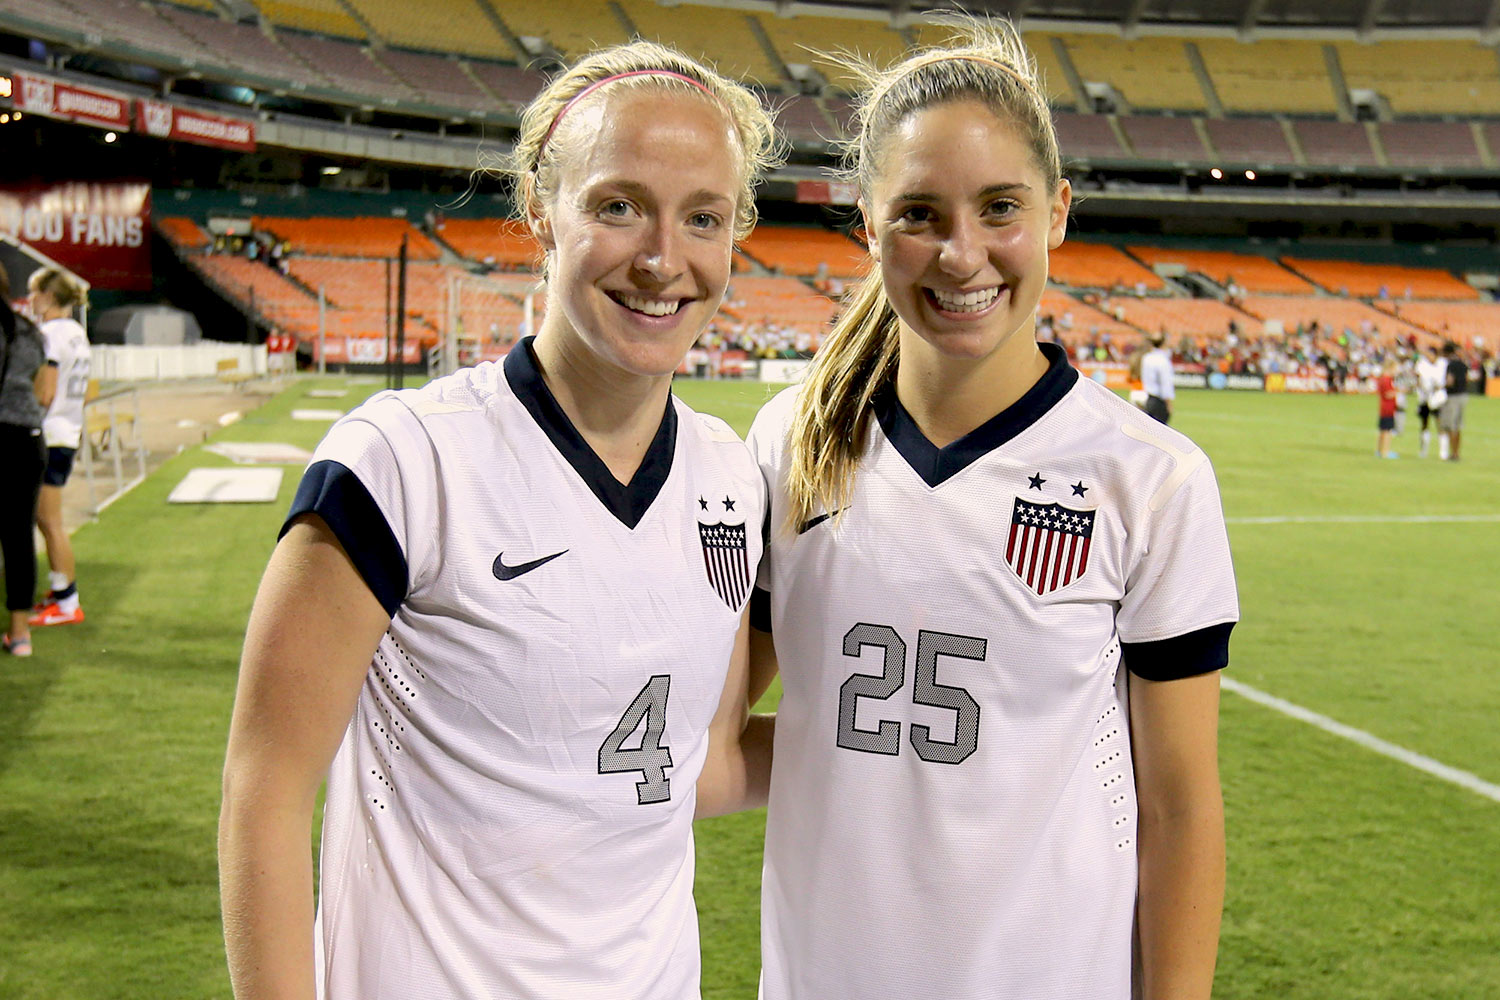 Two USA female soccer players stand together with arms around each other smiling to the camera